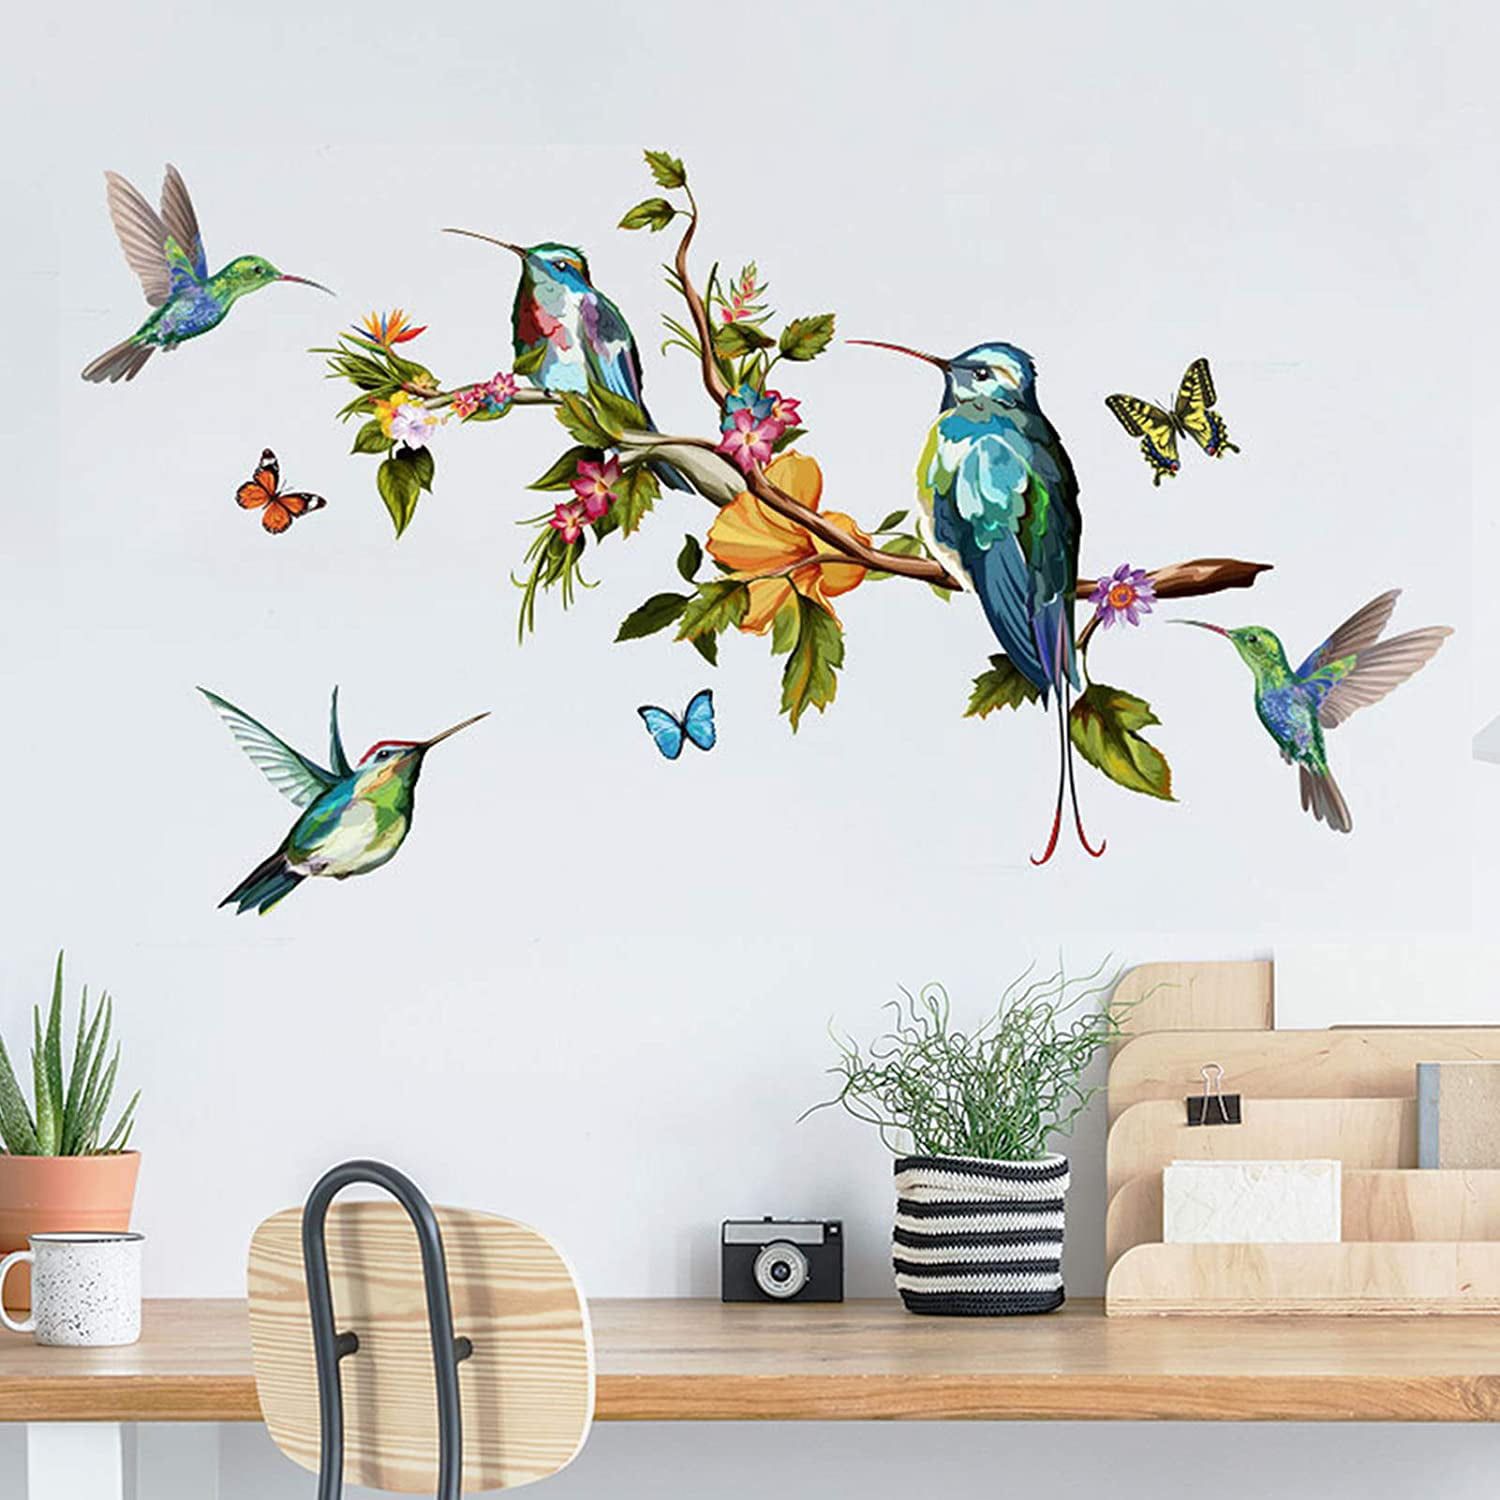 Hummingbird Wall Decals For Home, Hummingbirds On Tree Branch Wall Stickers,  Removable Watercolor Birds Butterflies Wall Art Mural Decor Home  Decorations For Bedroom Living Room Office – Walmart In Newest Hummingbird Wall Art (Gallery 1 of 20)